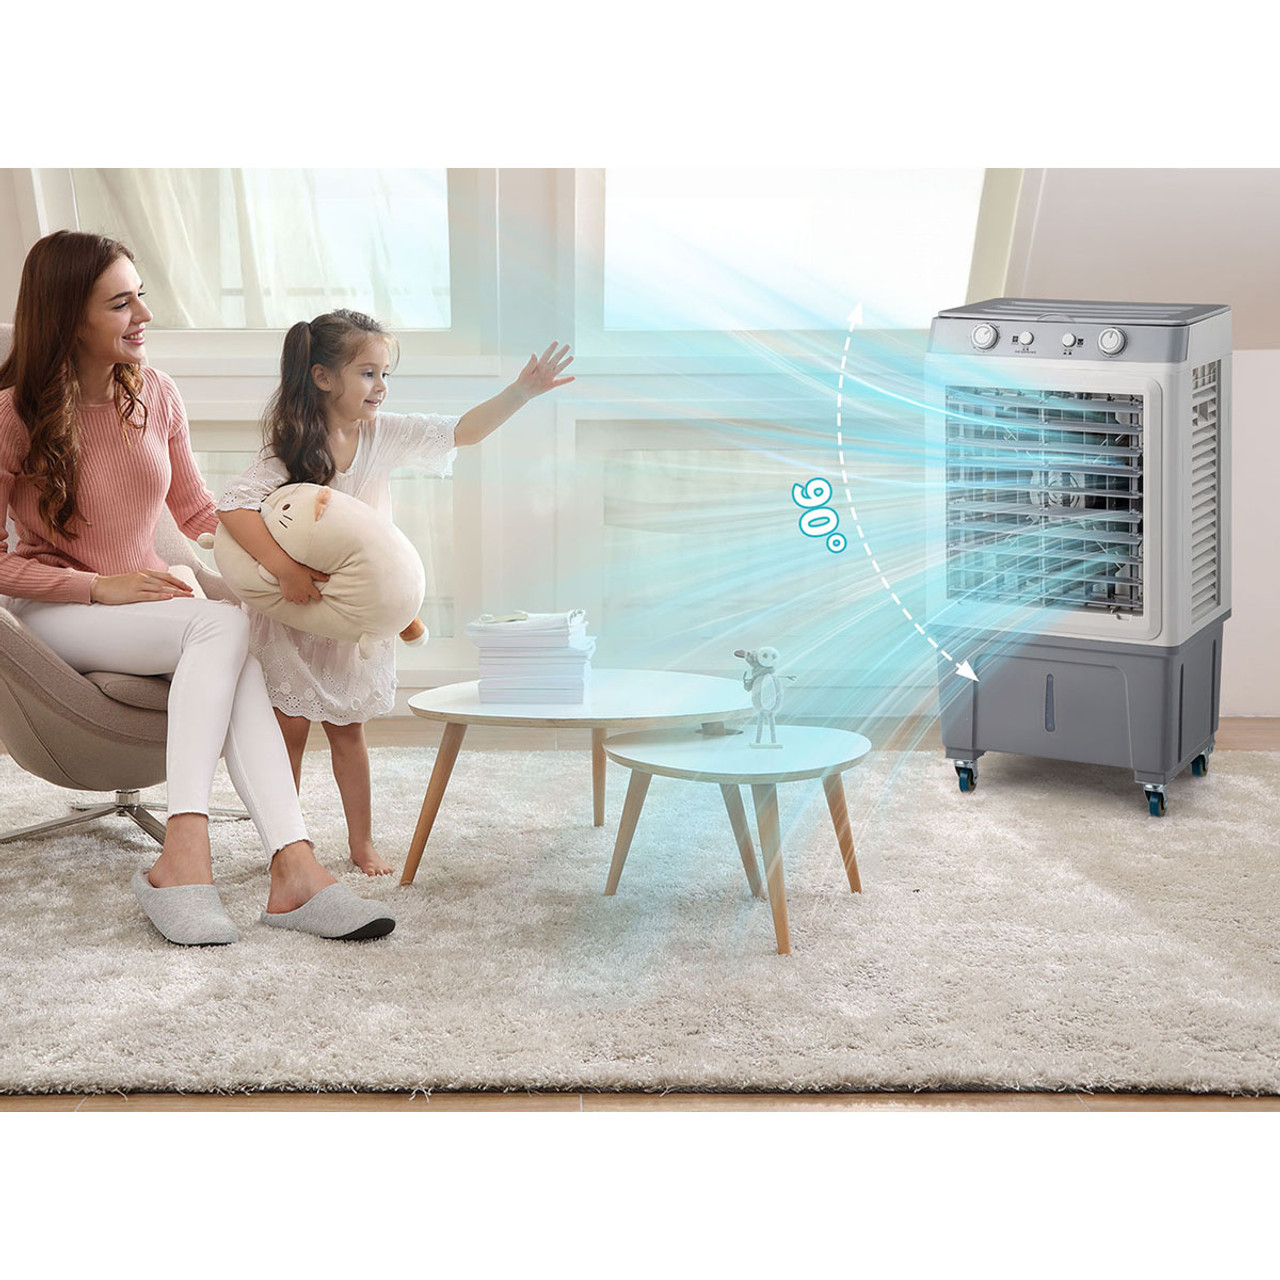 3-in-1 Portable Evaporative Air Cooler Unit product image